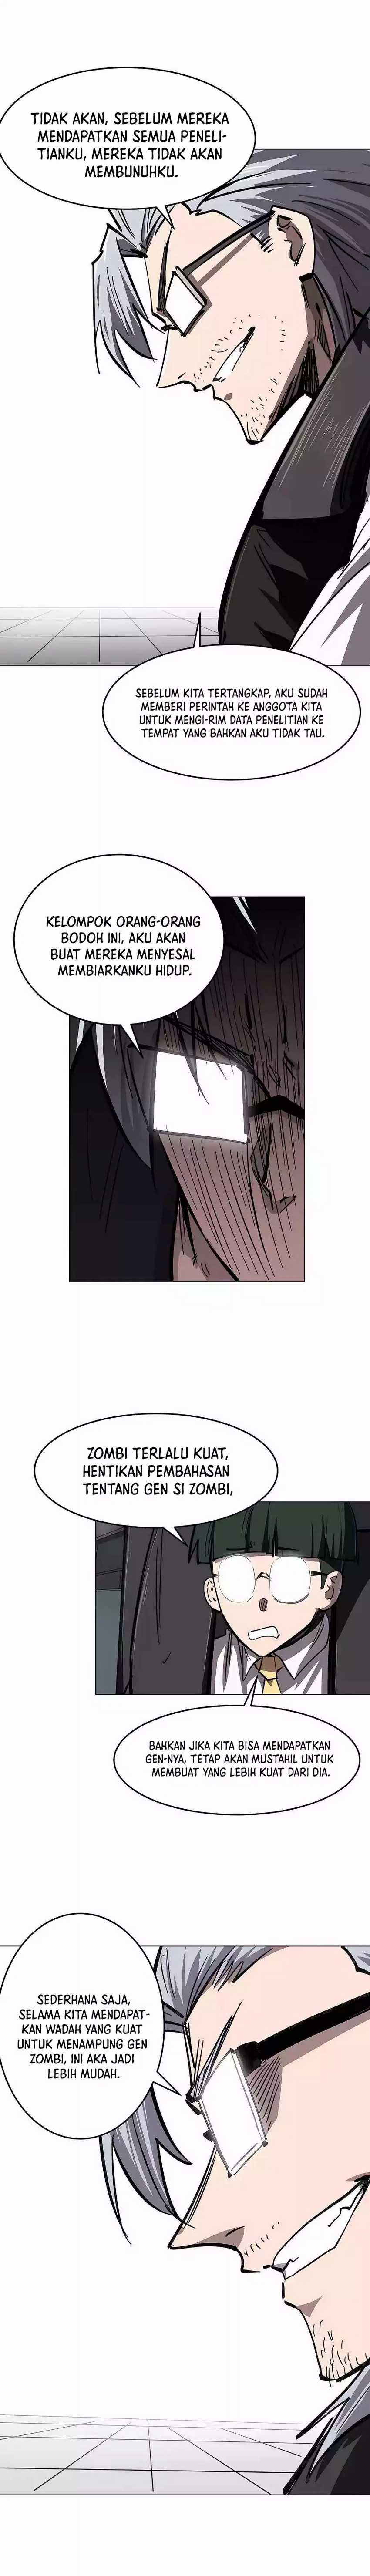 Mr. Zombie Chapter 41 Image 1